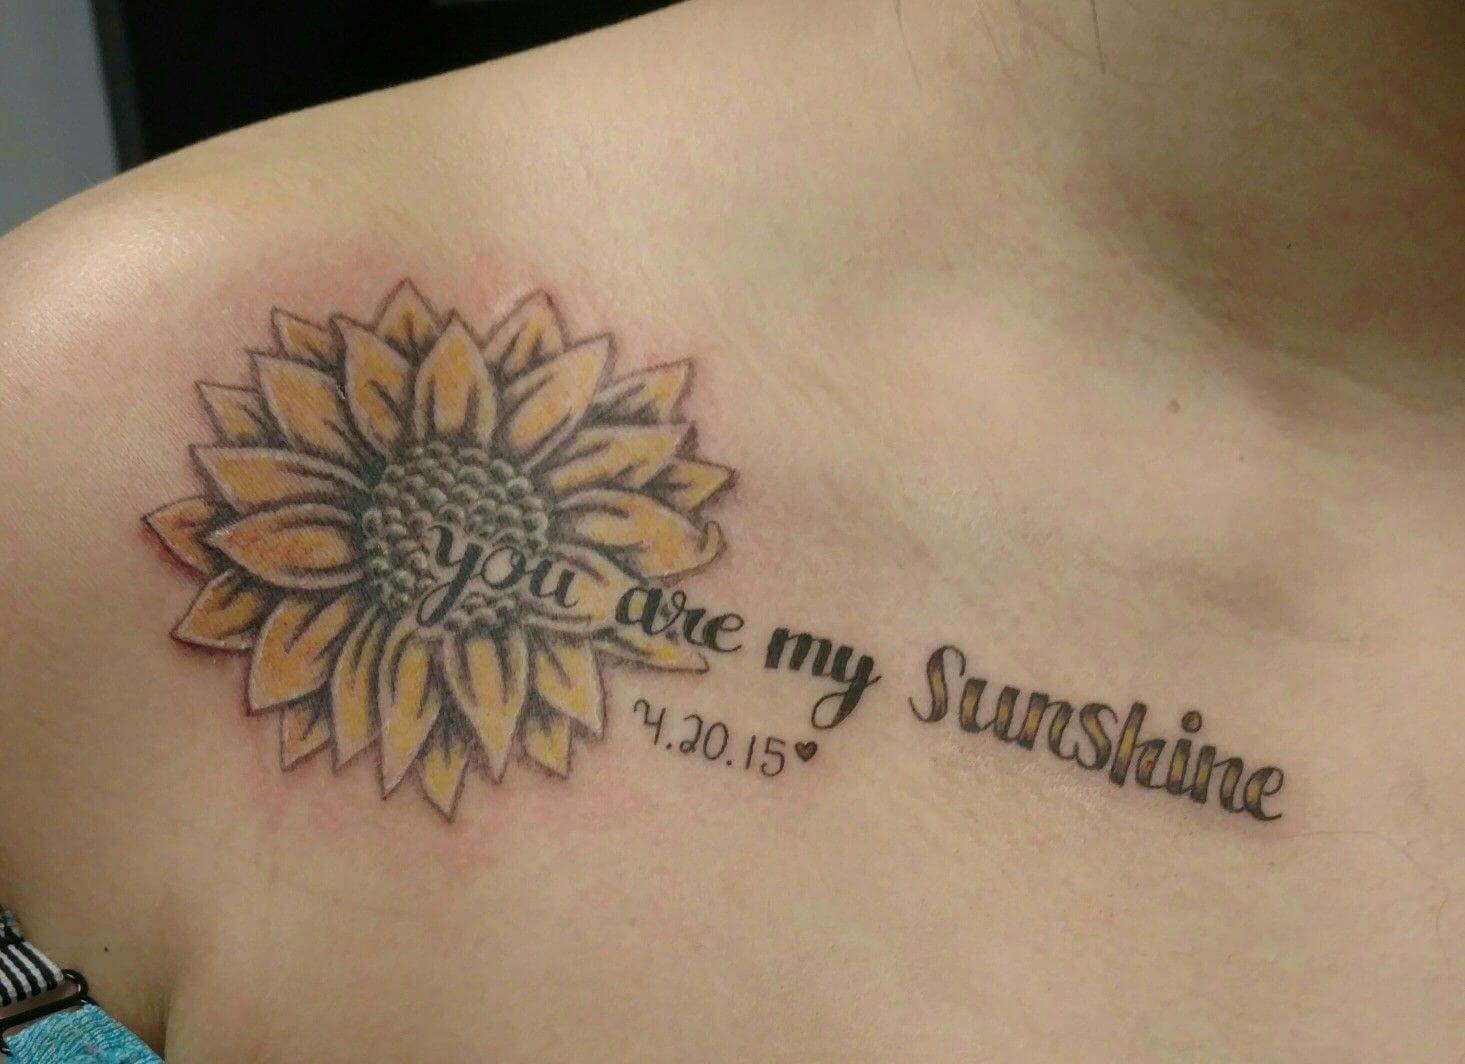 Tattoo uploaded by Lydia Bush  On top of the sunflower I want You are my  sunshine then below I want my grandbaby name Hazel Grace  Tattoodo